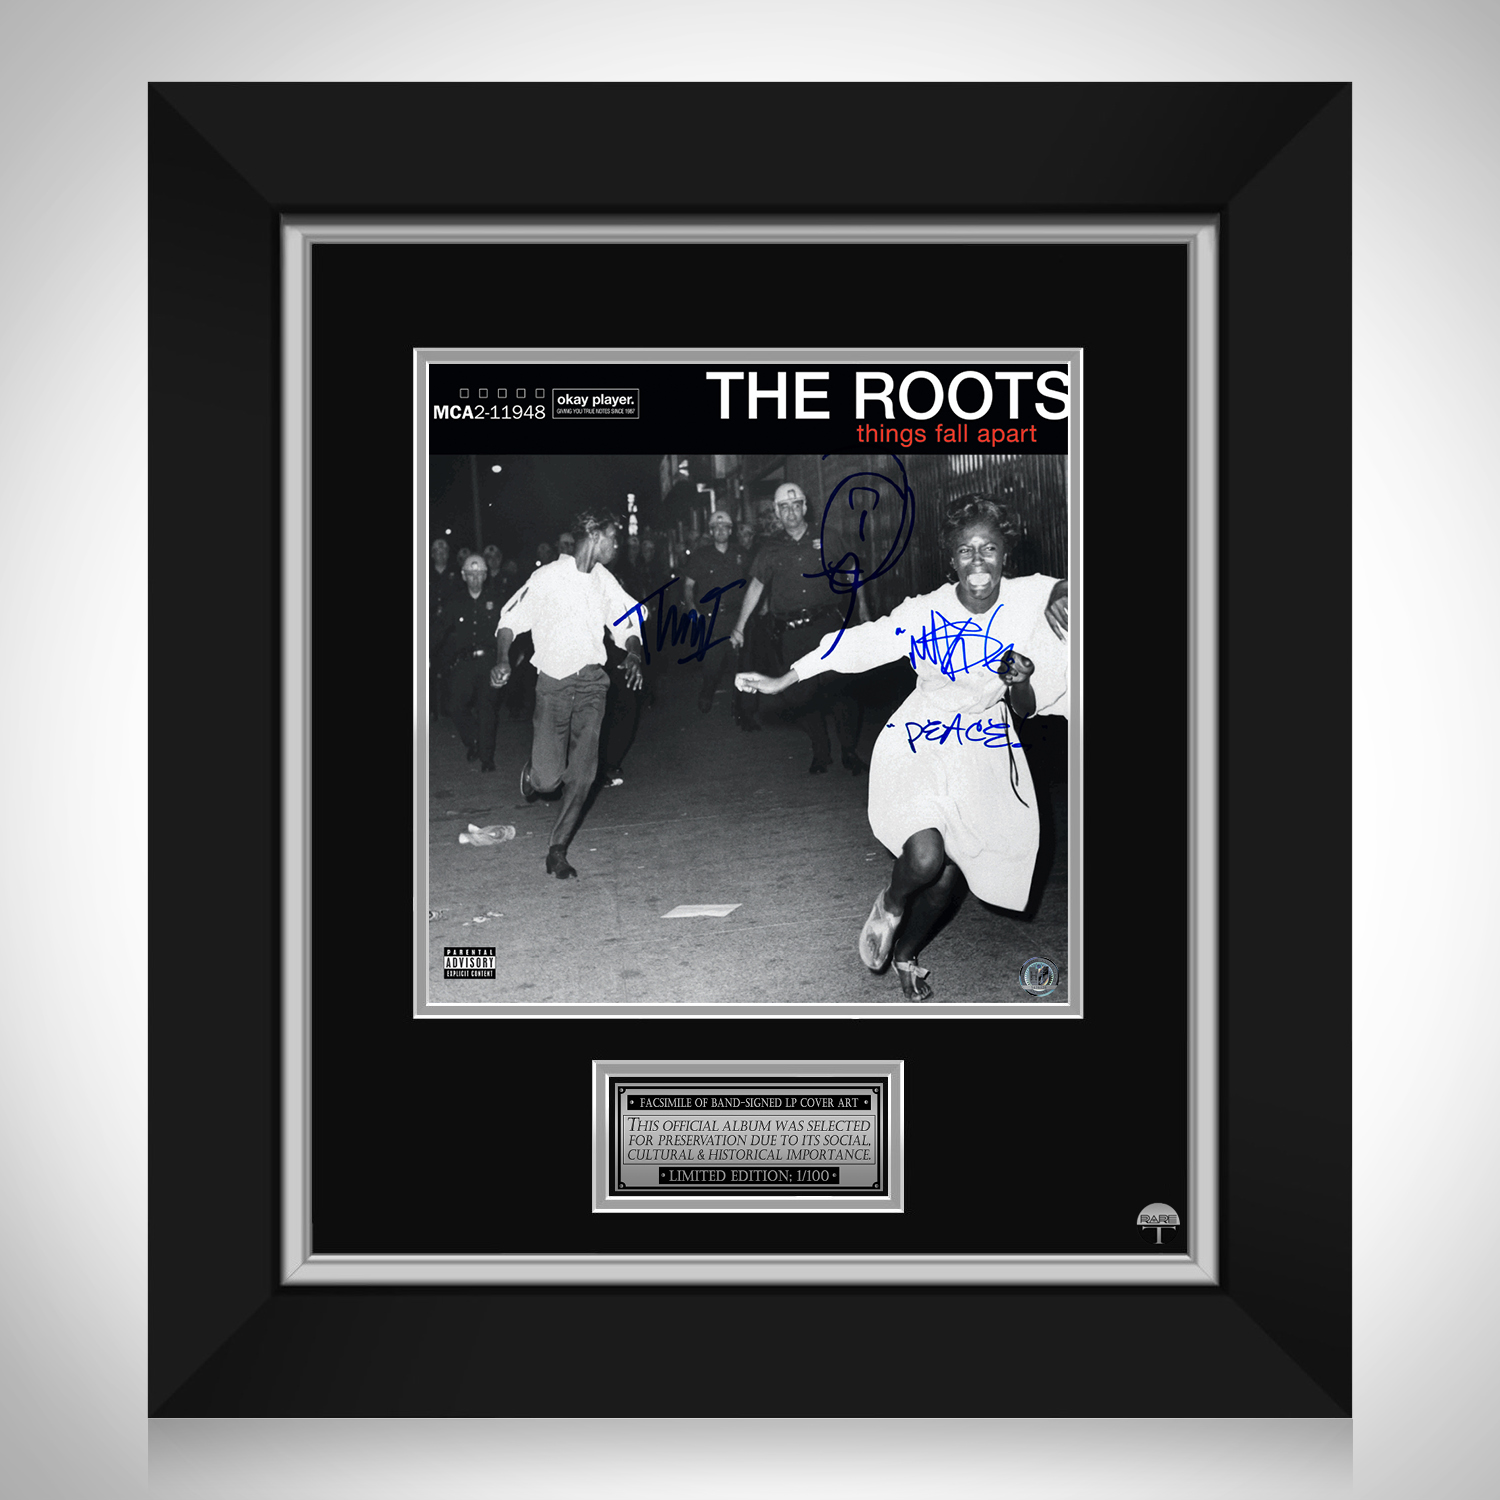 The Roots - Things Fall Apart LP Cover Limited Signature Edition 